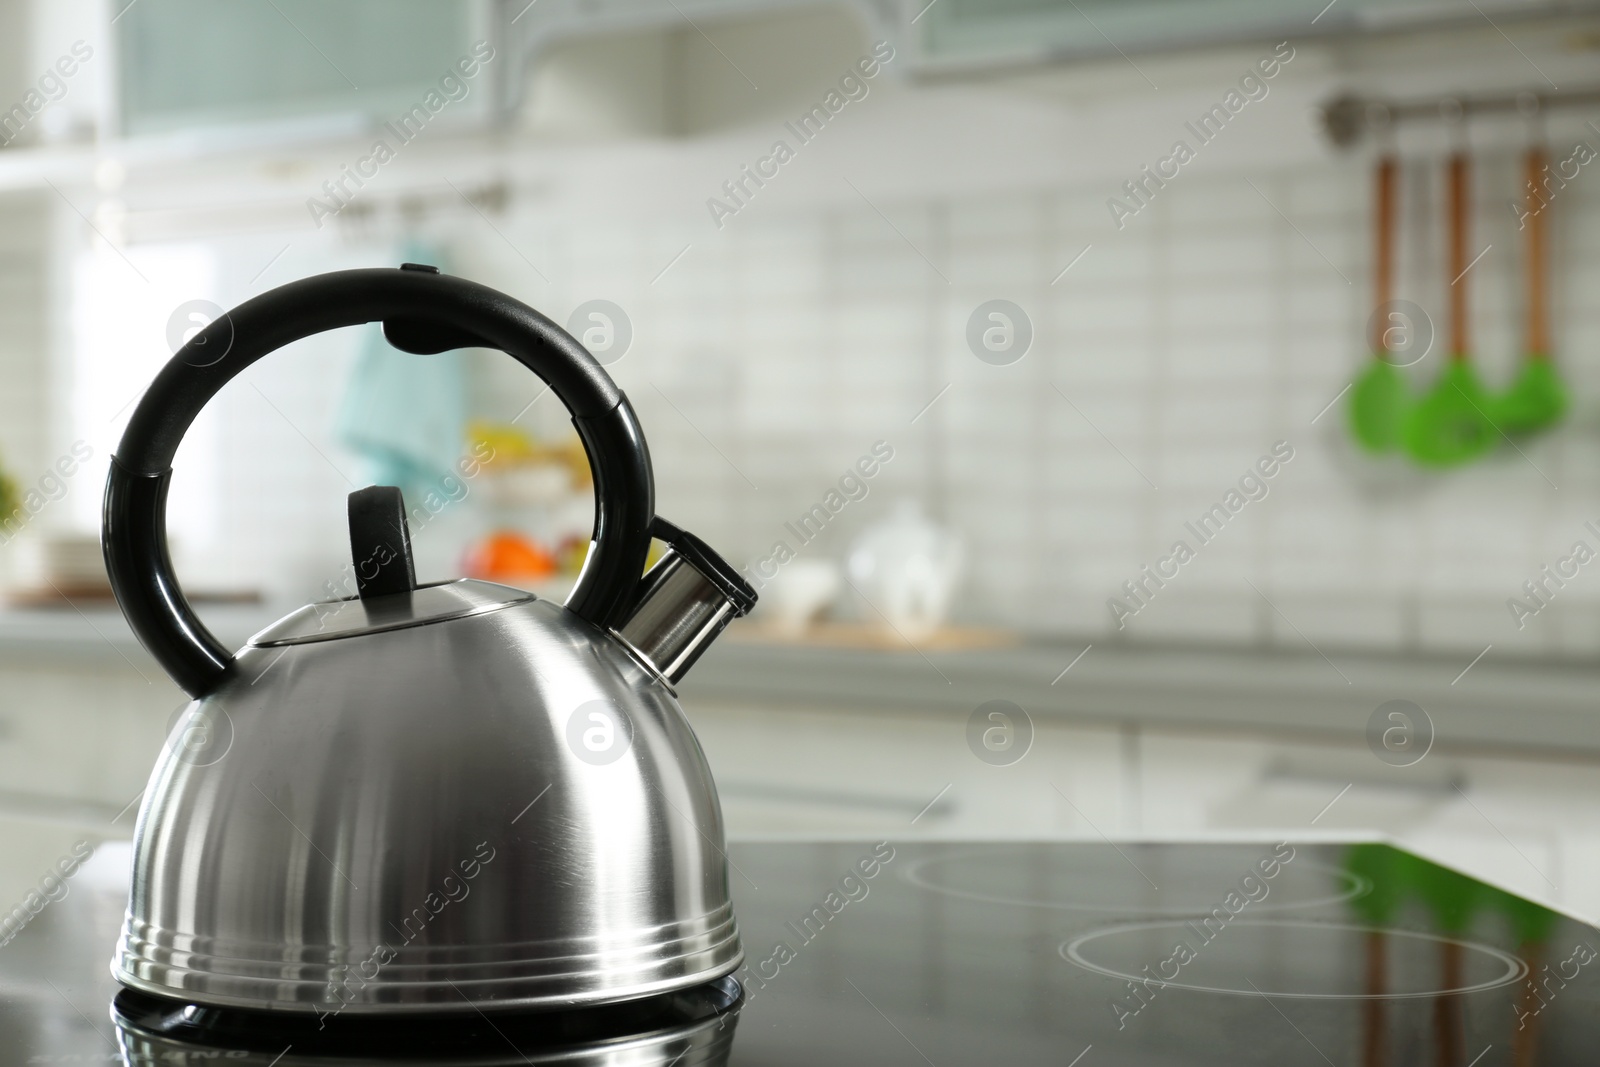 Photo of Modern kettle with whistle on stove in kitchen, space for text